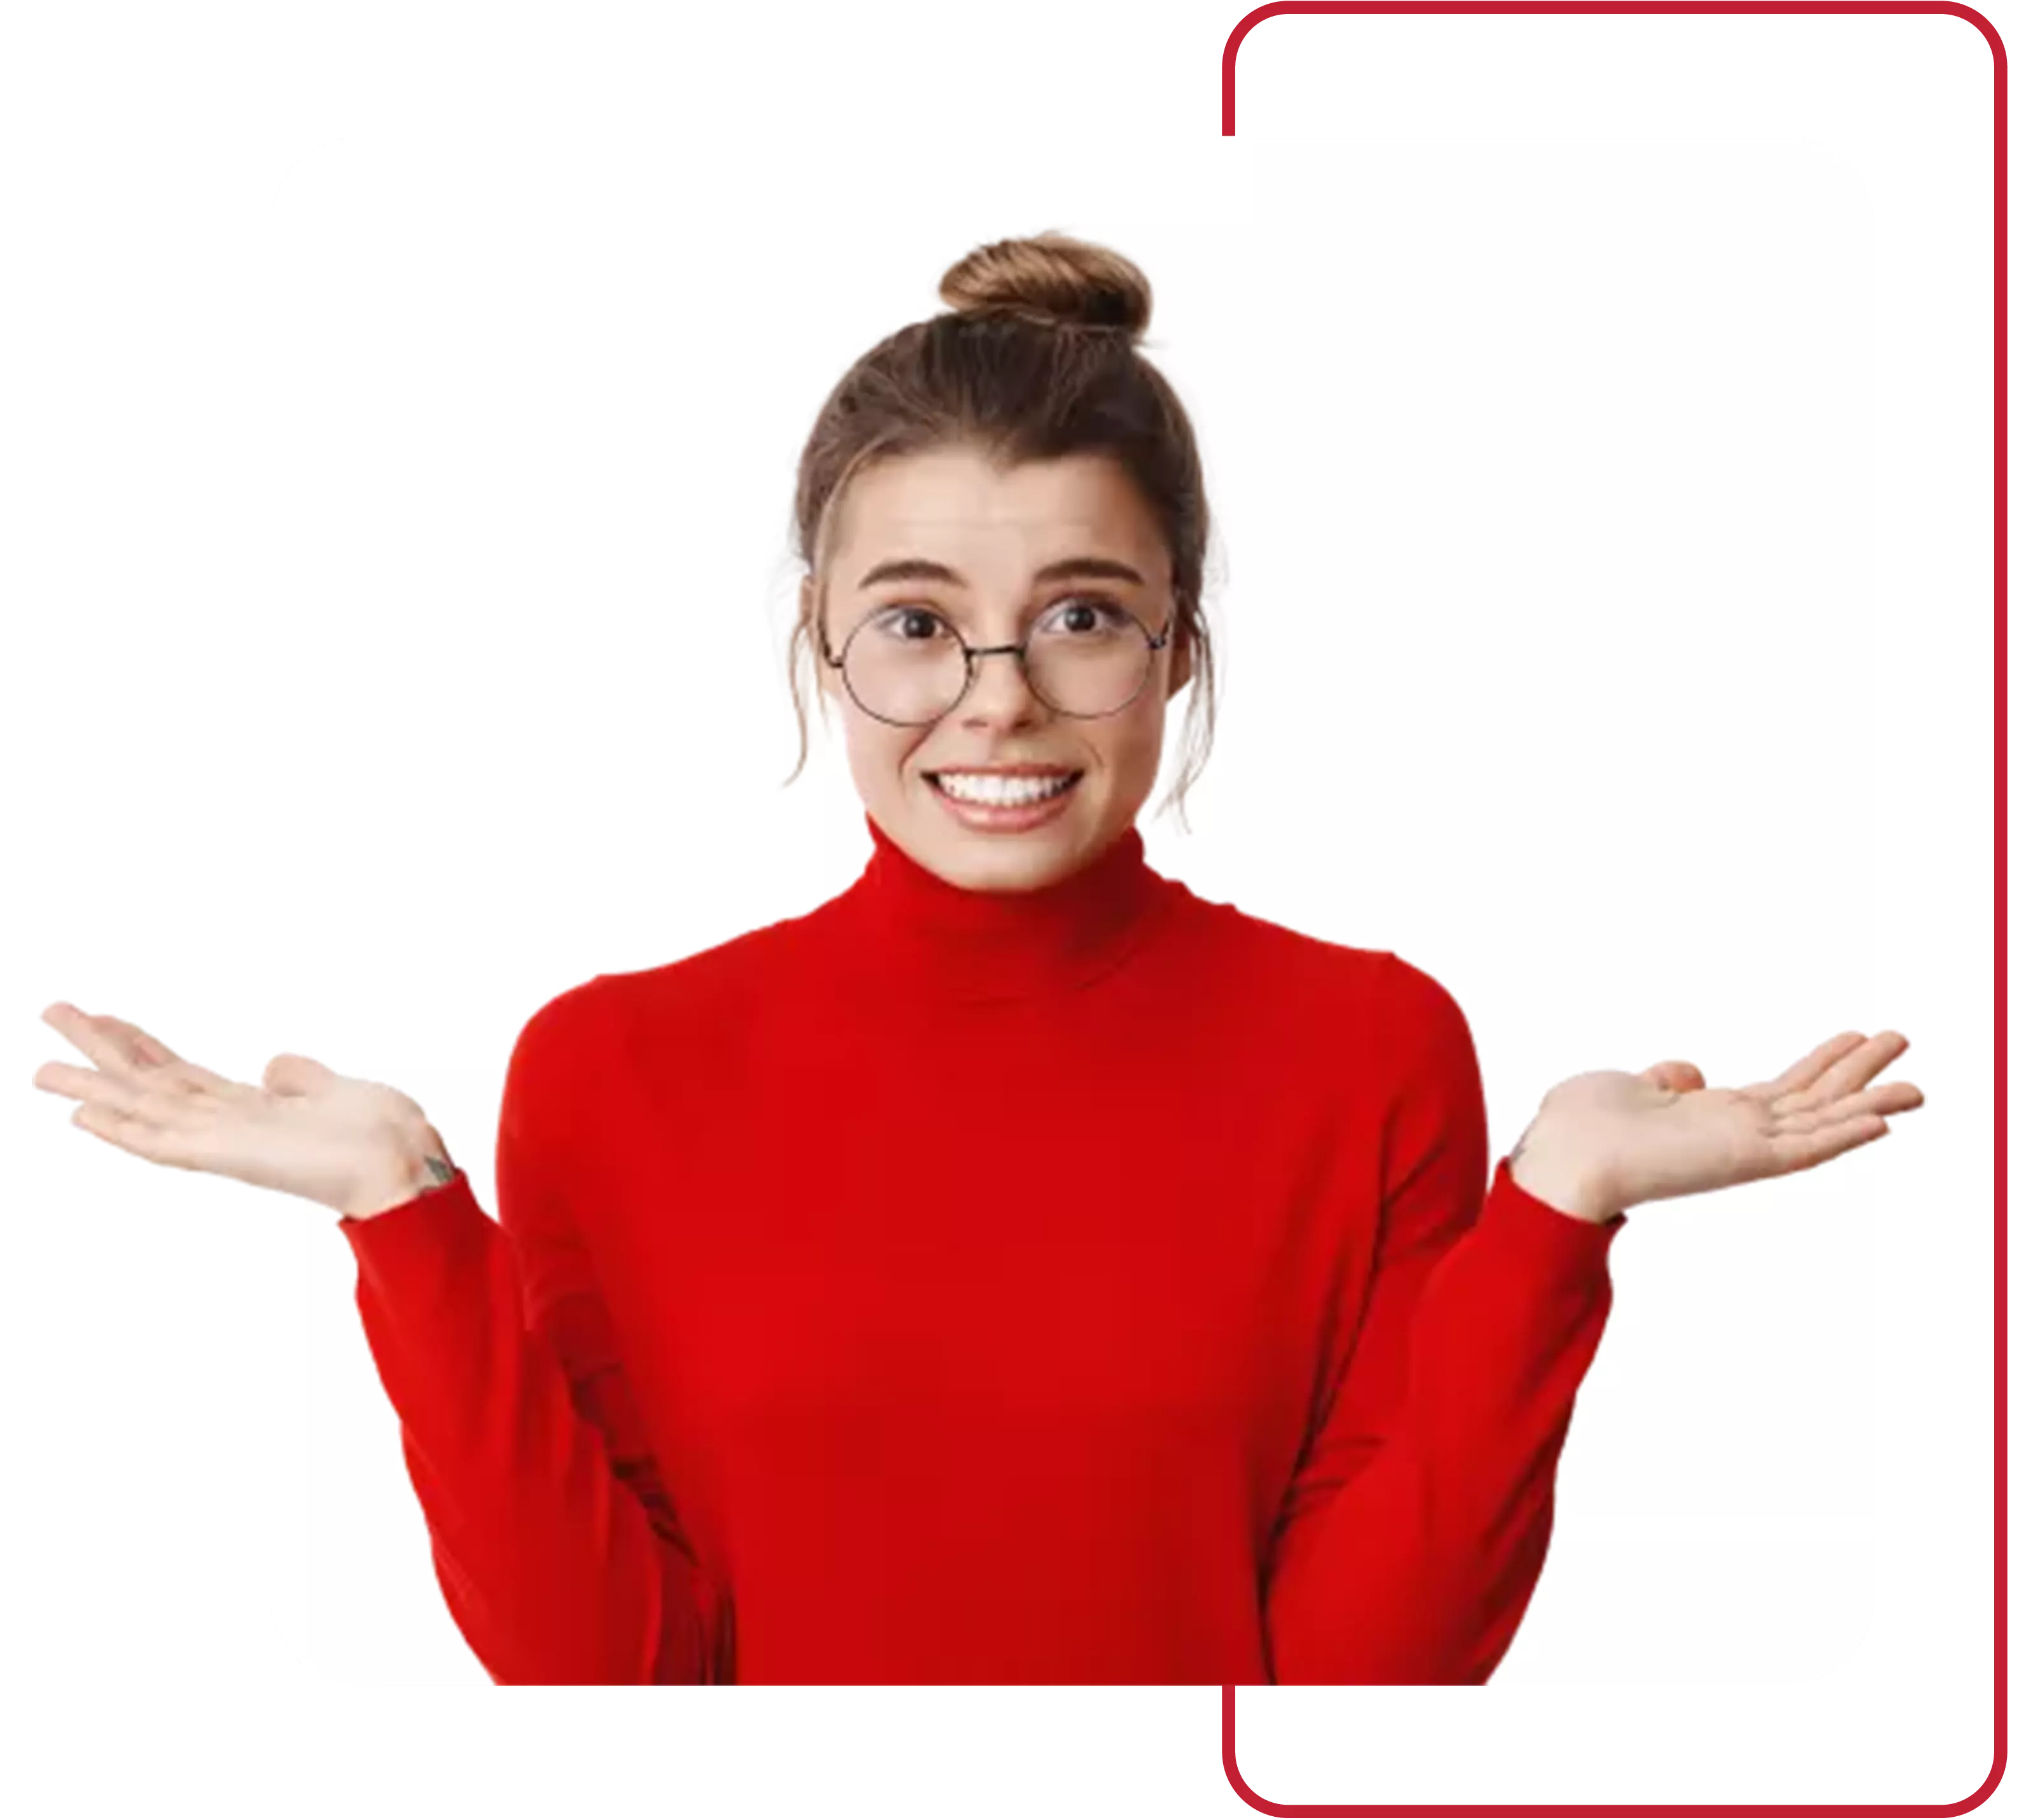 The picture shows a lady in a red turtleneck top with glasses and her hair in a bun where both of her hands are raised, displaying a shocked gesture.